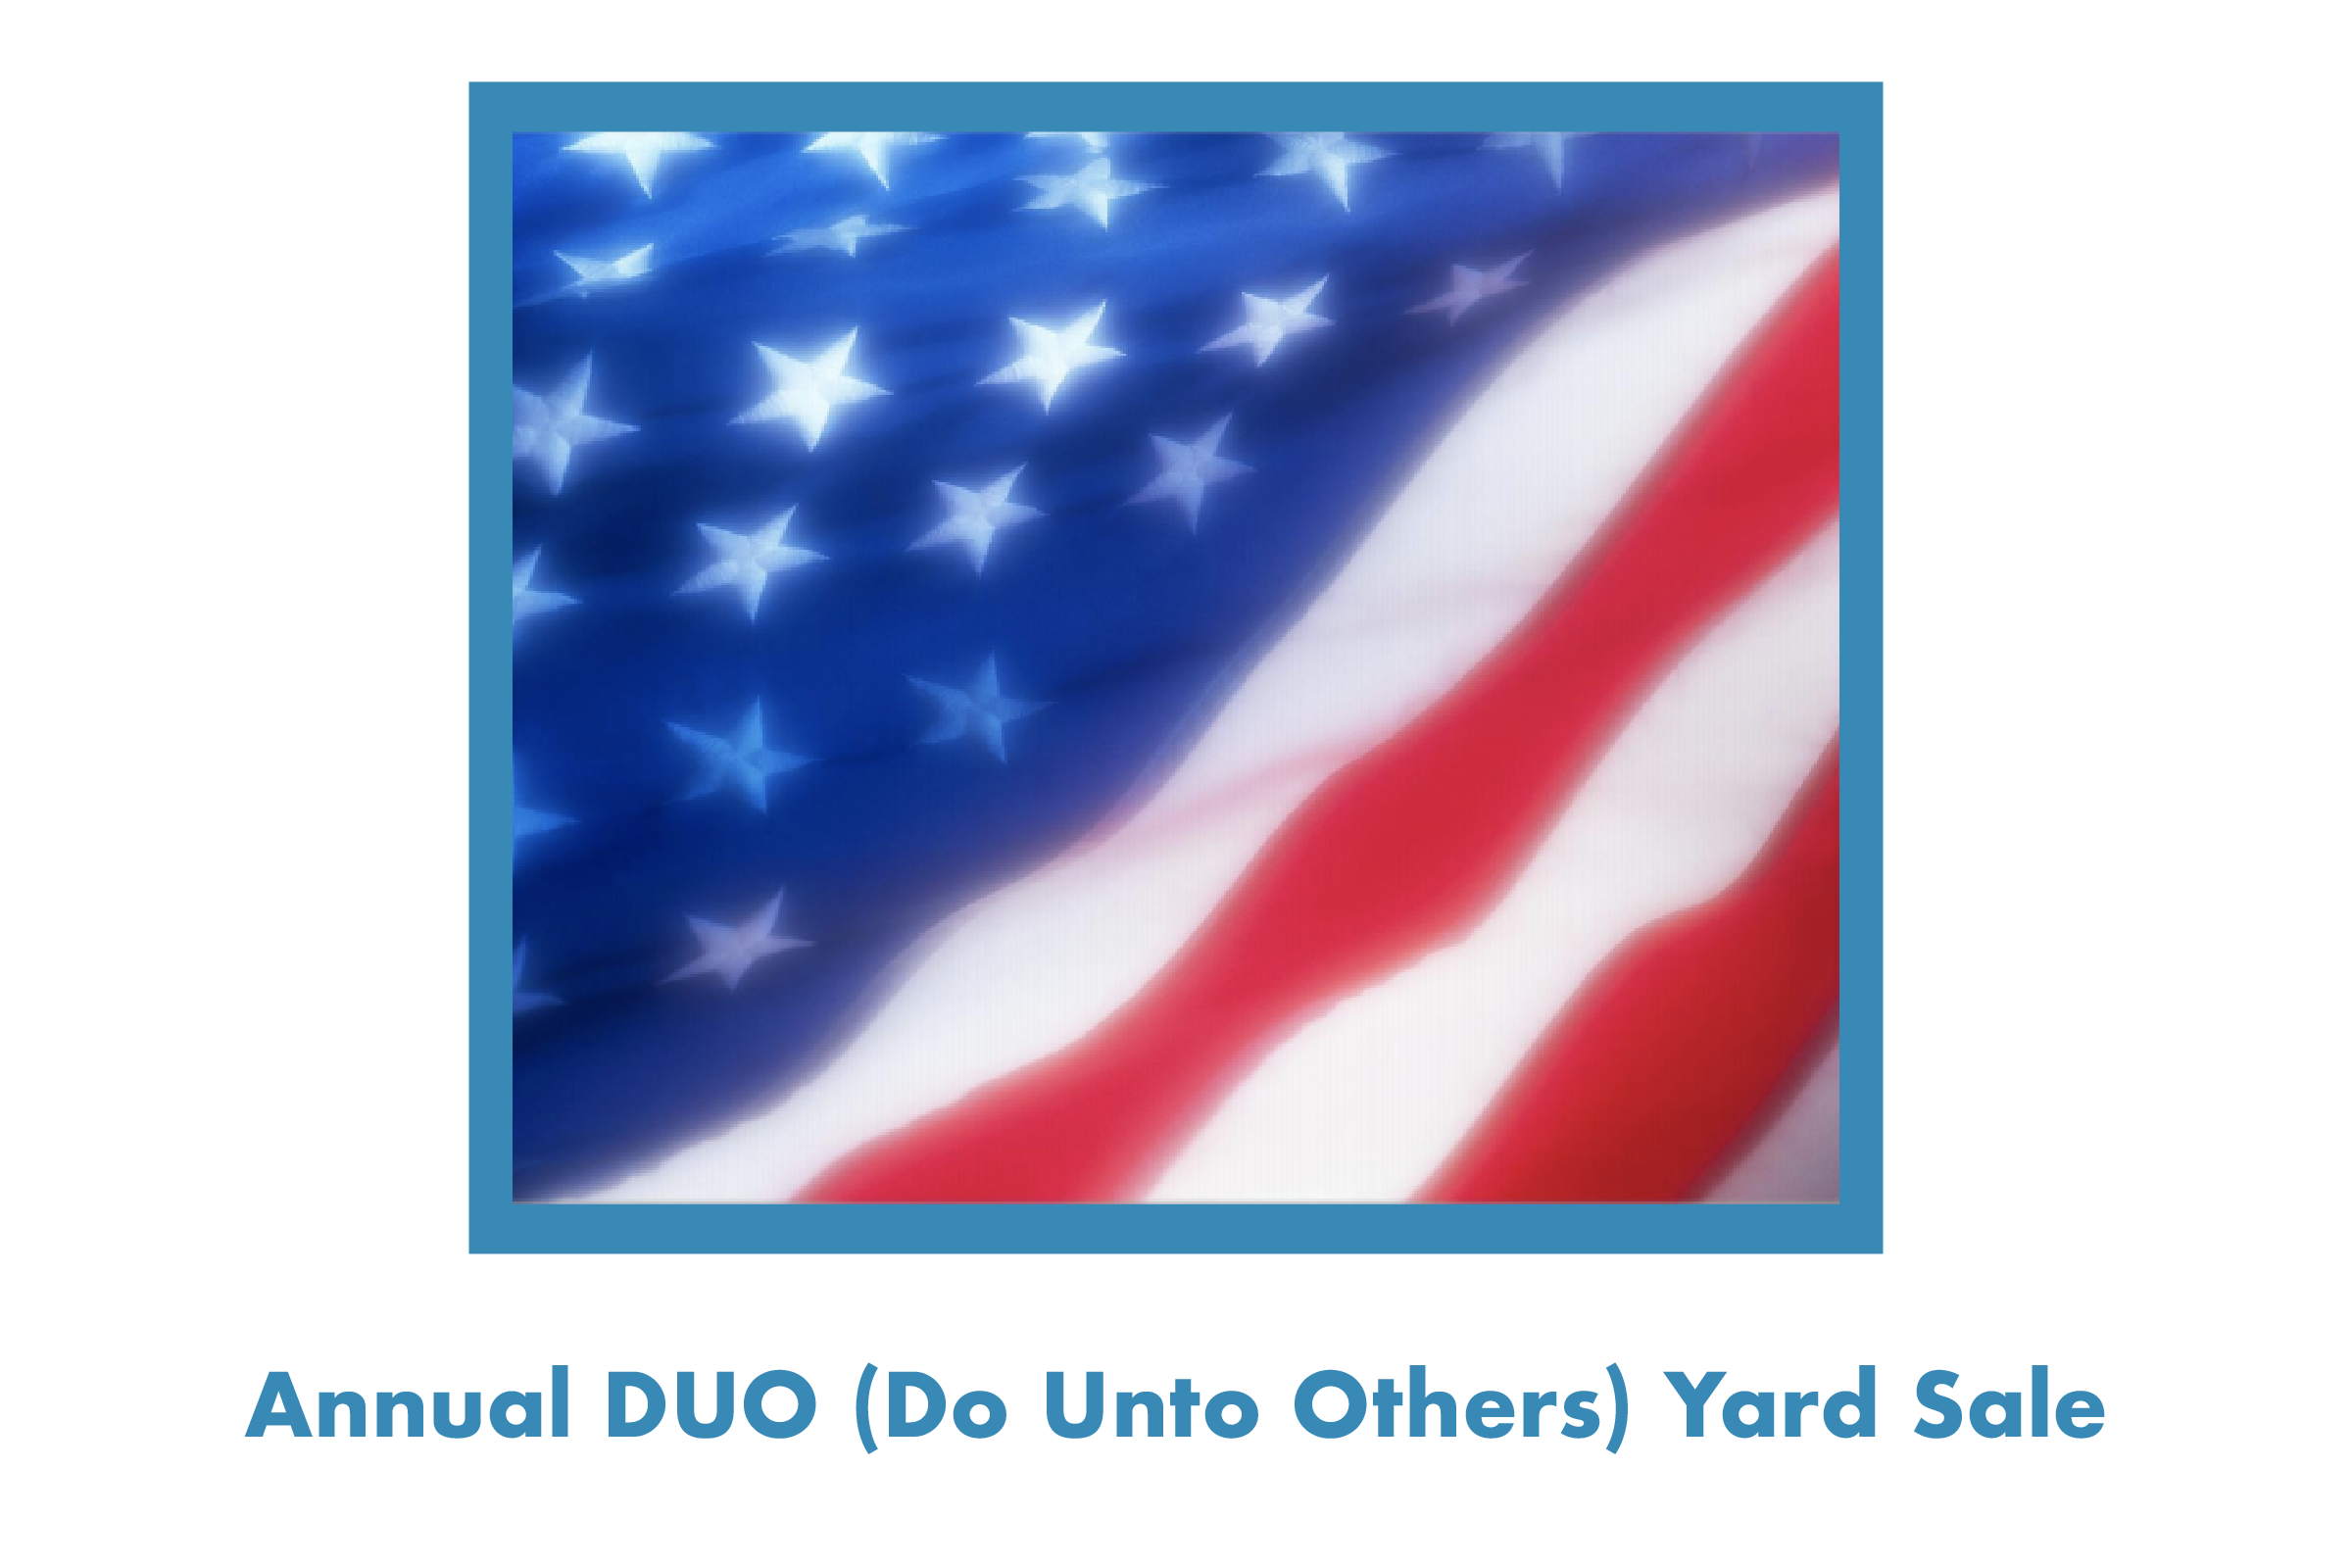 Past Event: Annual DUO (Do Unto Others) Yard Sale